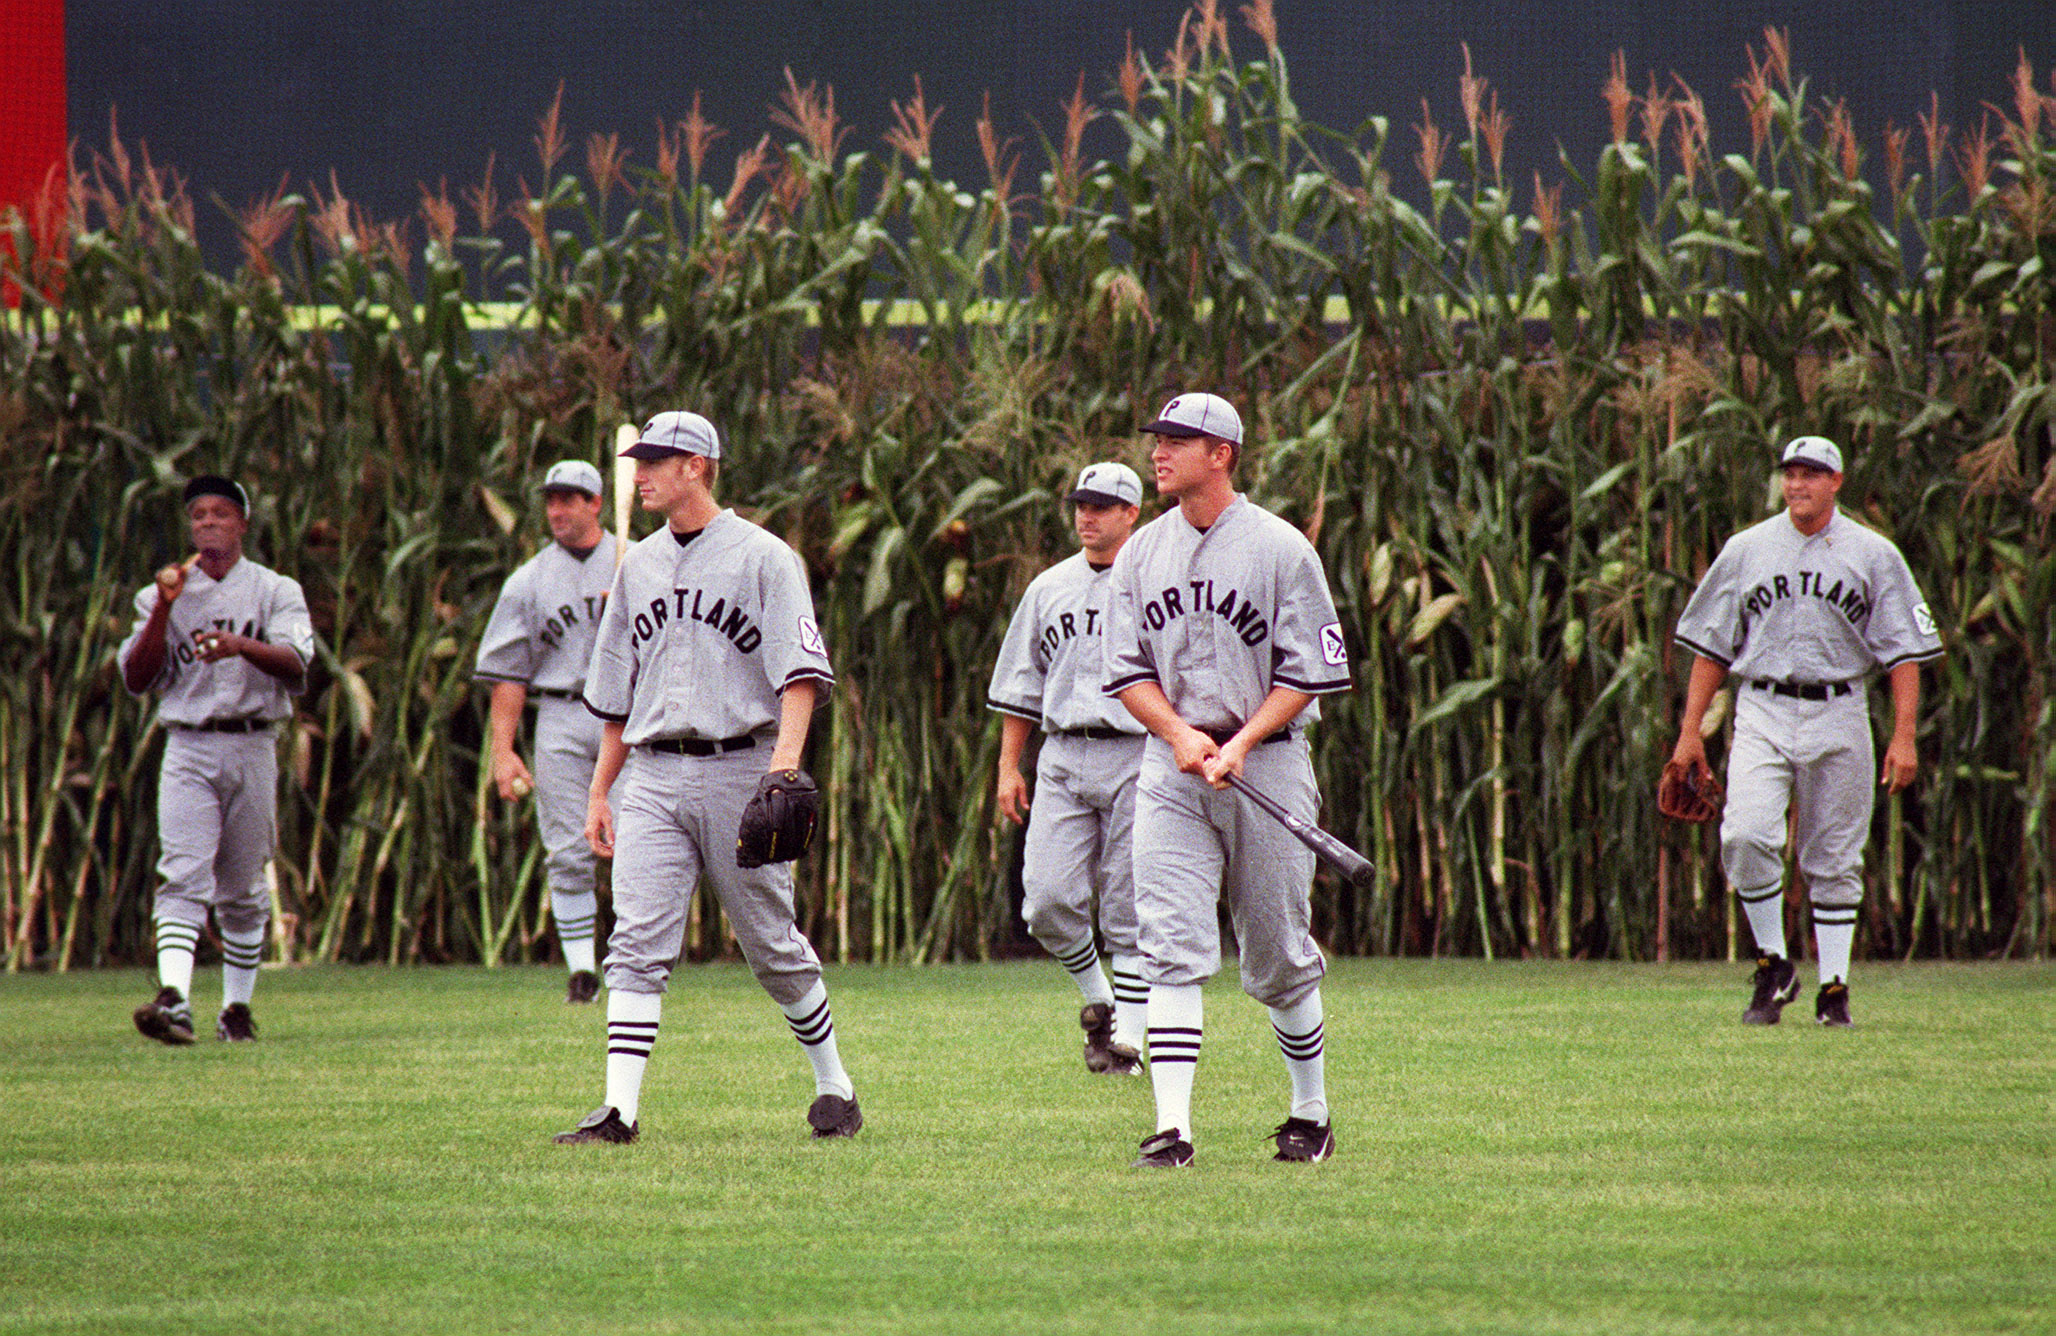 MLB Announces New Plans for "Field of Dreams" Game InsideHook